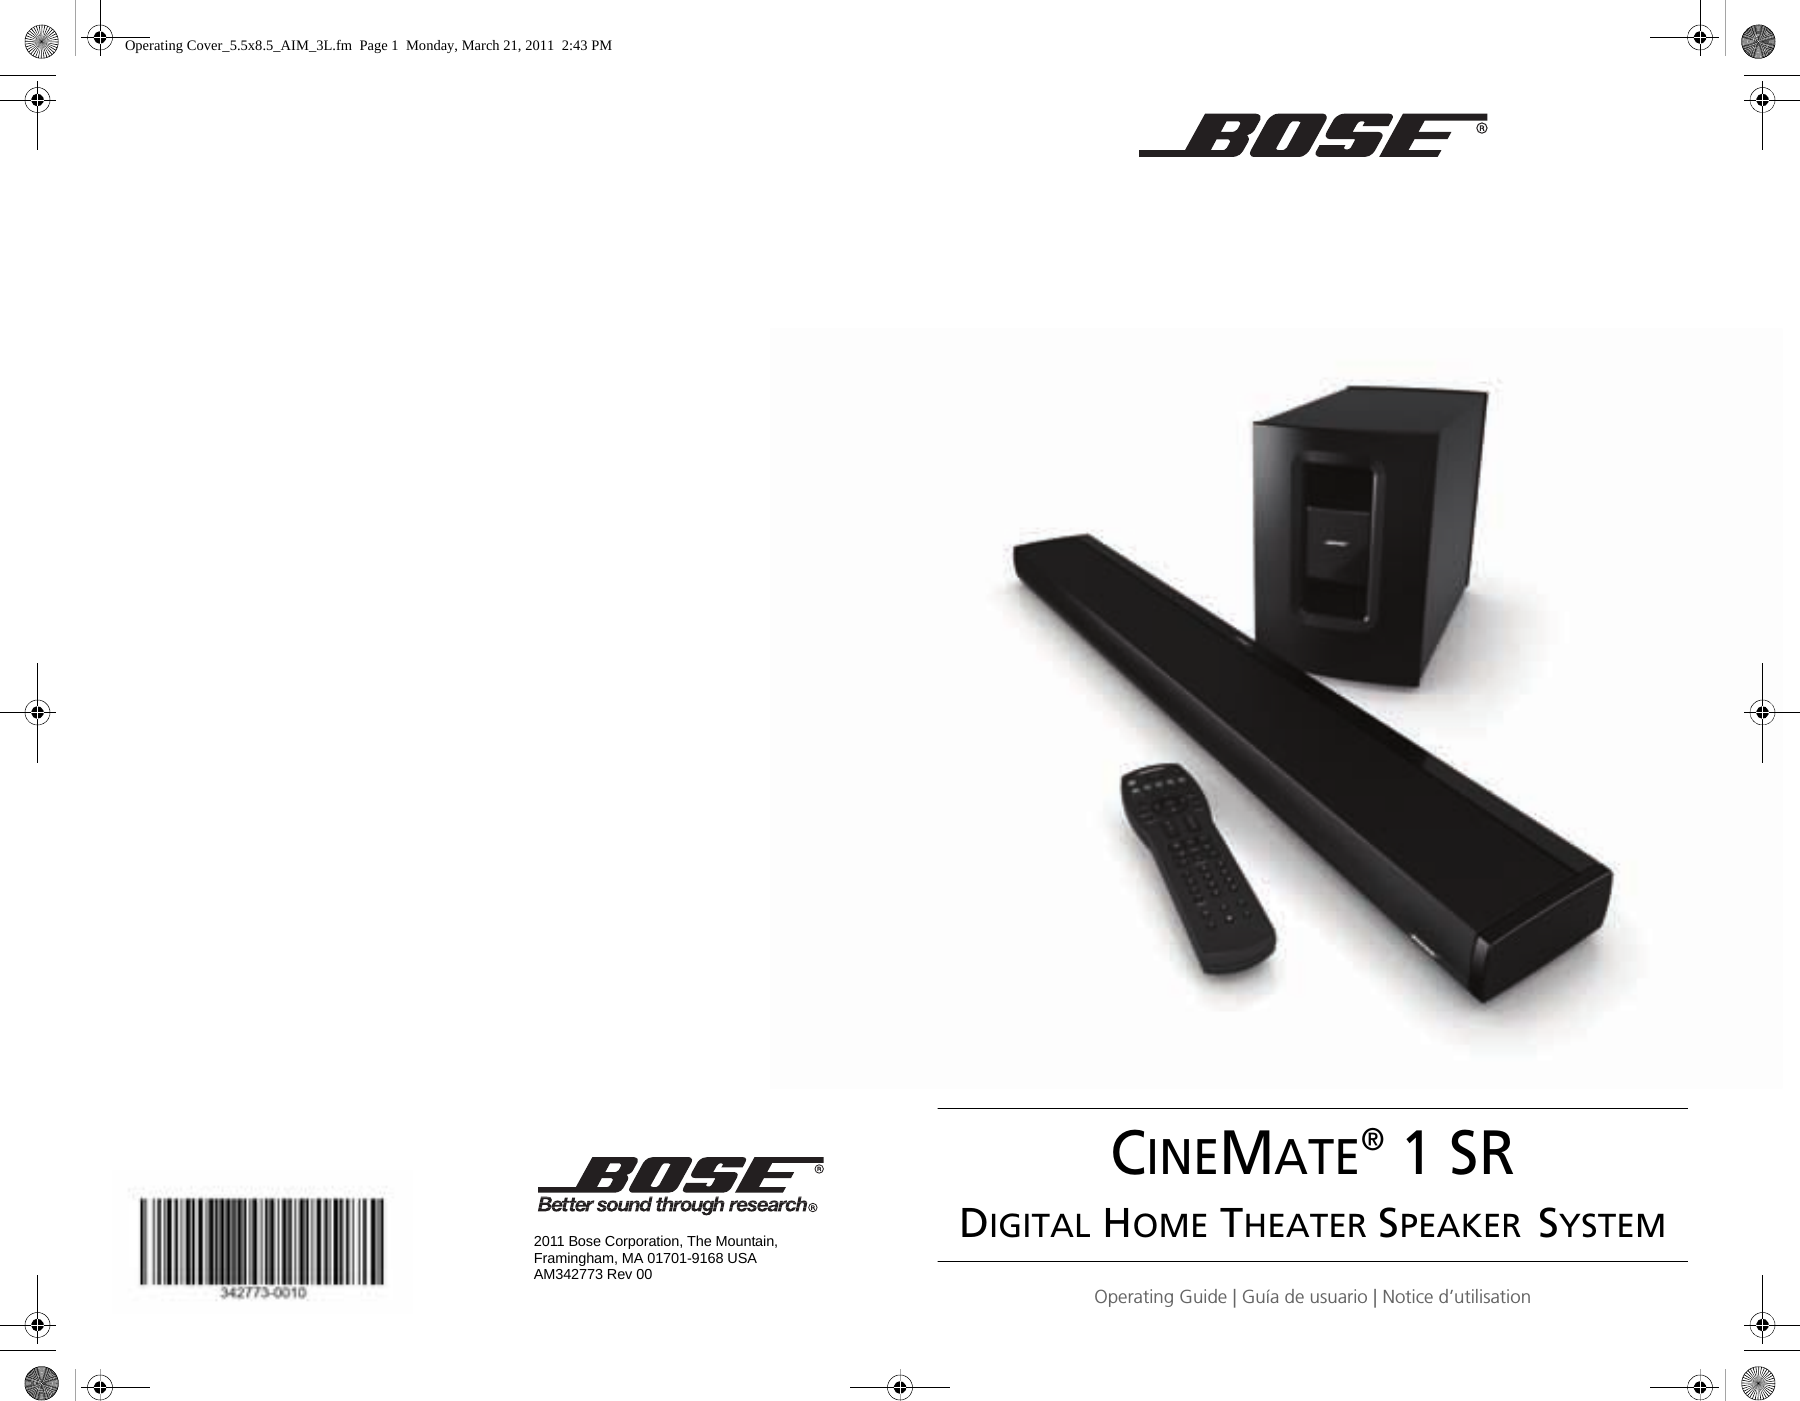 CINEMATE® 1 SRDIGITAL HOME THEATER SPEAKER SYSTEMOperating Guide | Guía de usuario | Notice d’utilisation2011 Bose Corporation, The Mountain,Framingham, MA 01701-9168 USAAM342773 Rev 00Operating Cover_5.5x8.5_AIM_3L.fm  Page 1  Monday, March 21, 2011  2:43 PM